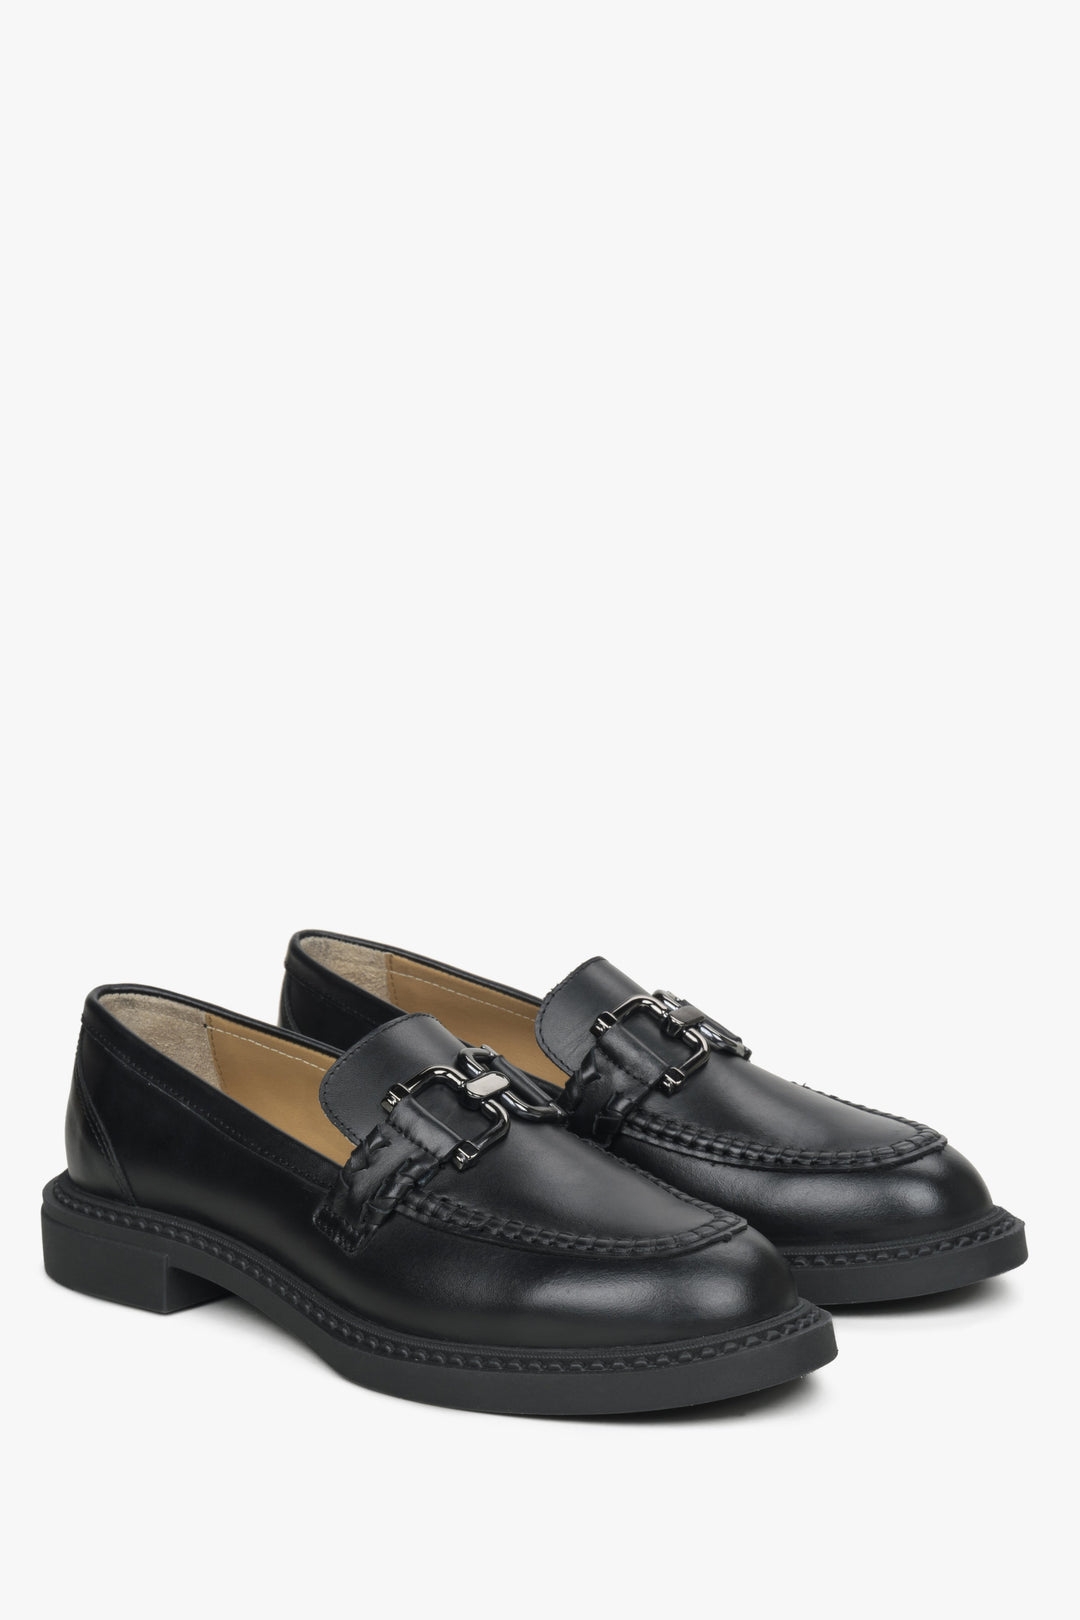 Women's black loafers with a buckle by Estro.